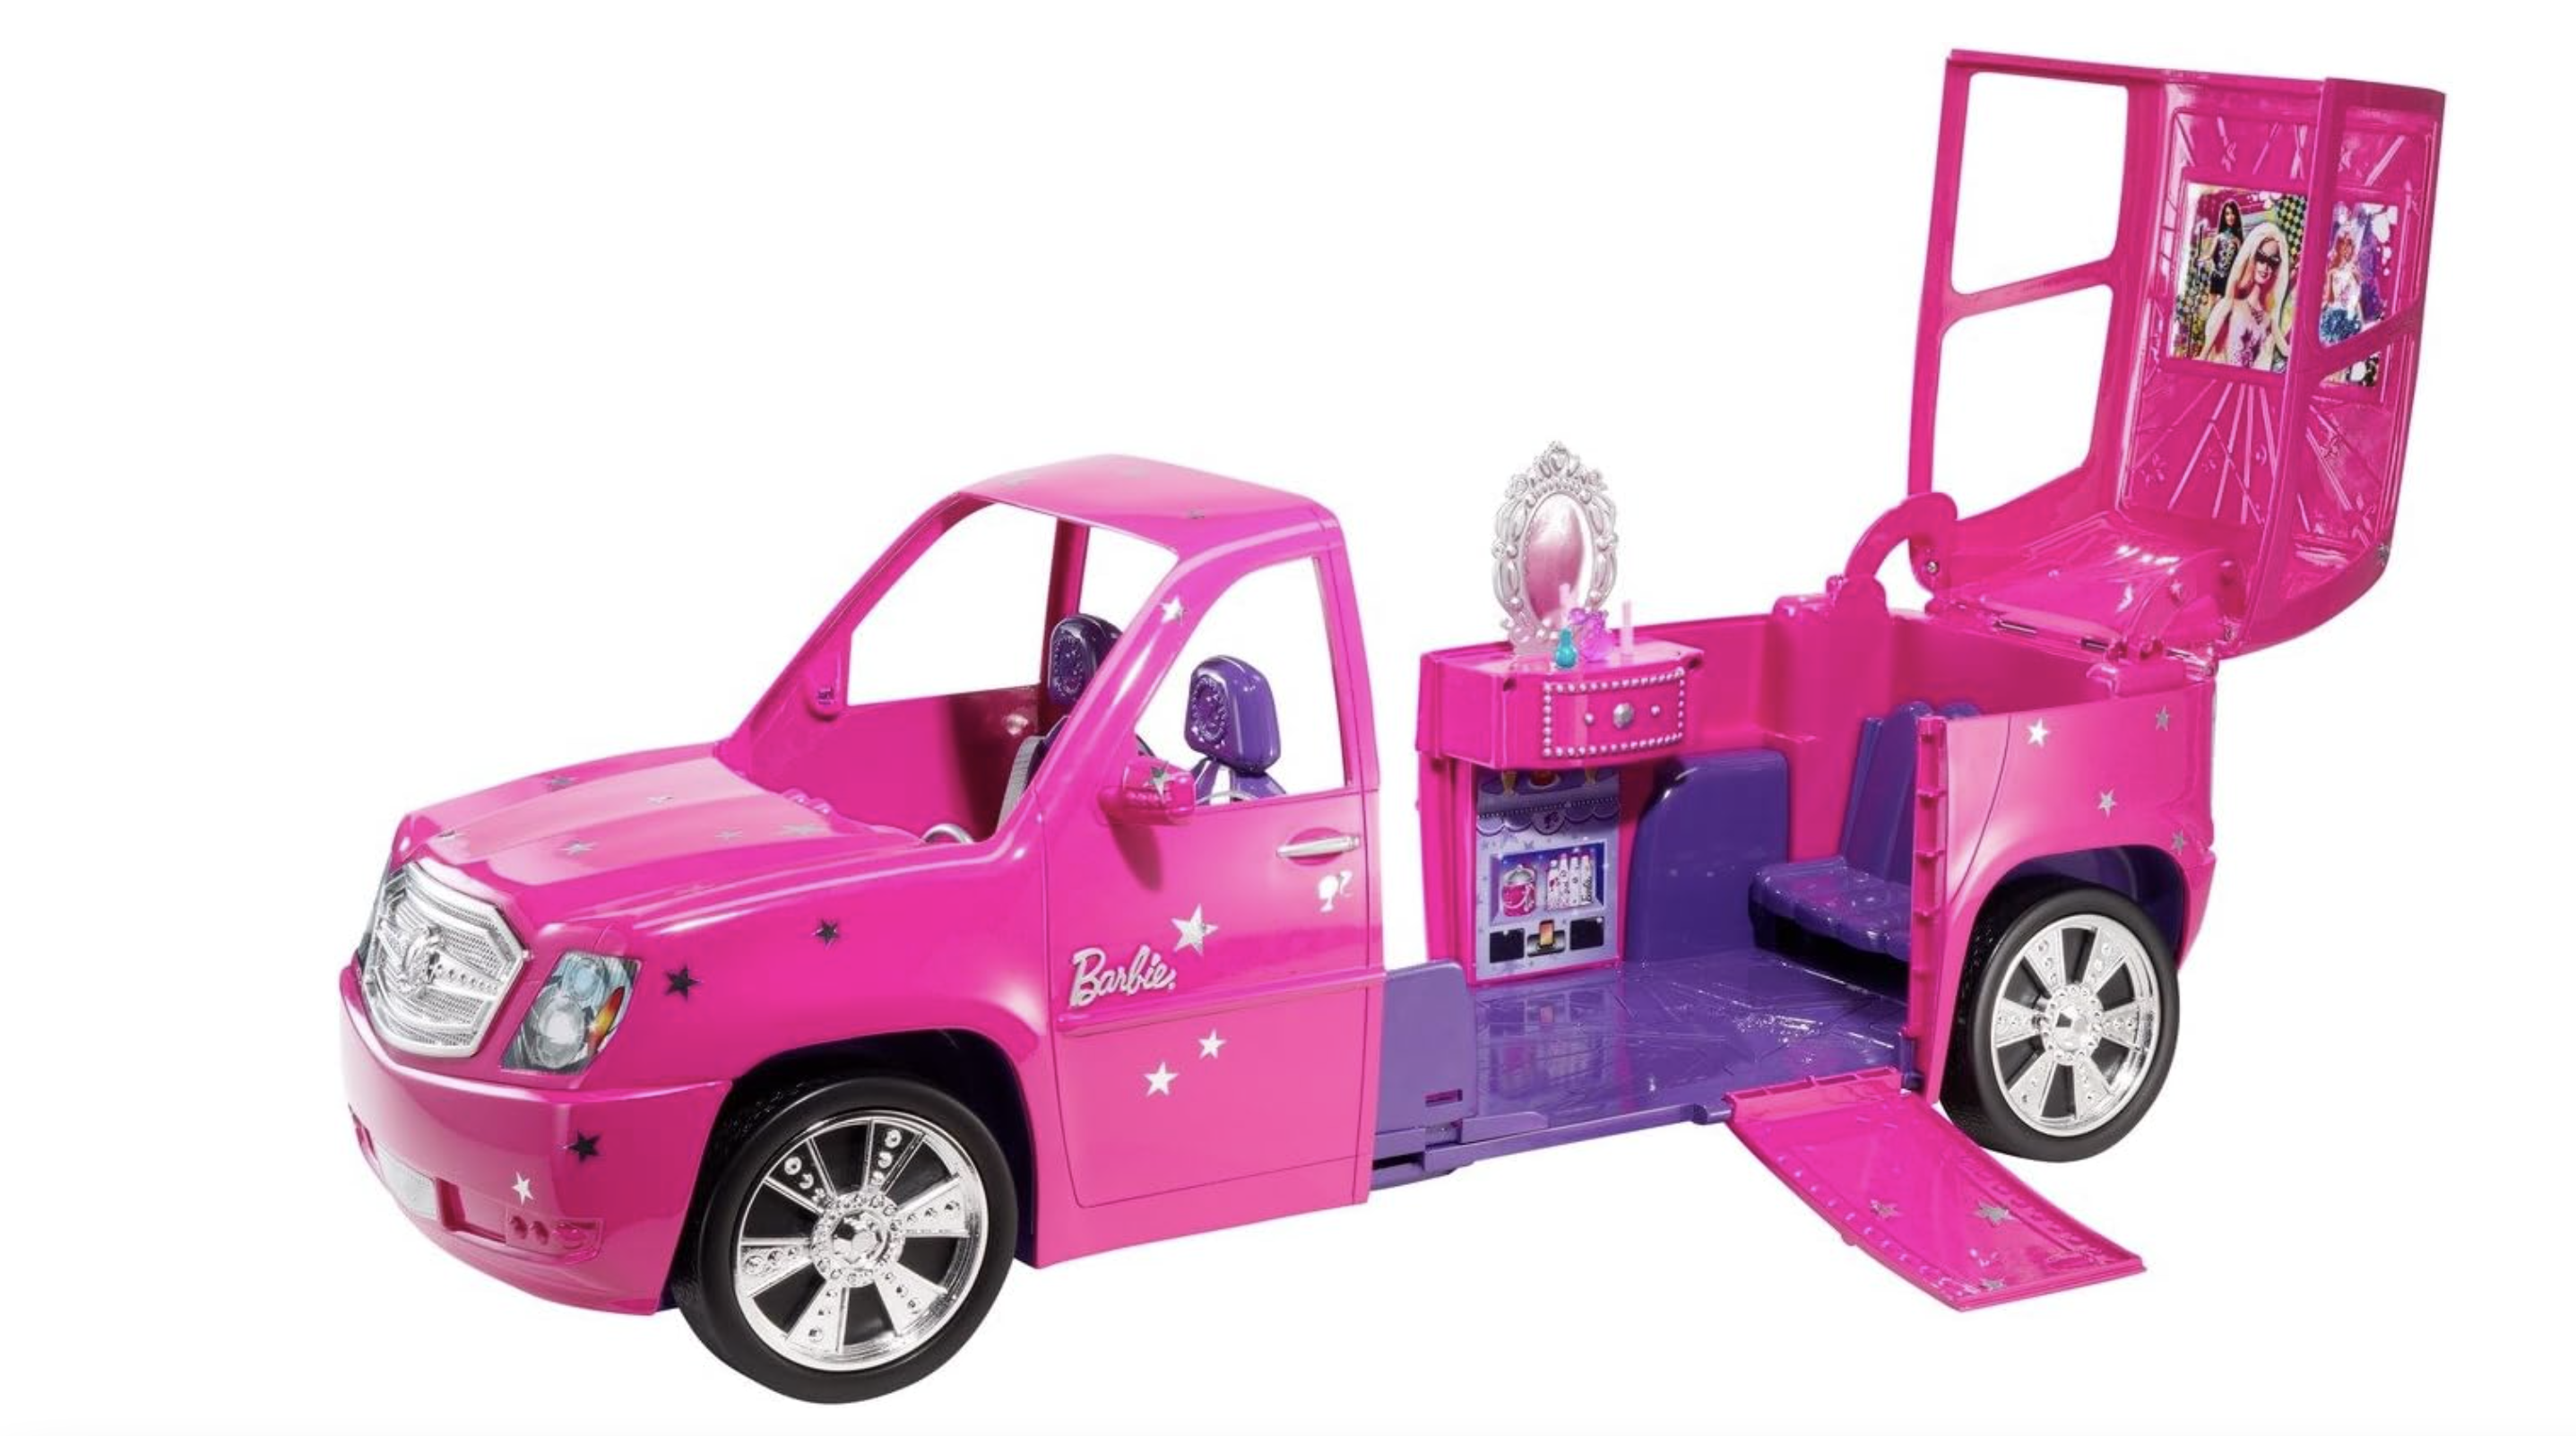 The Barbie Limo toy with the top opened for display